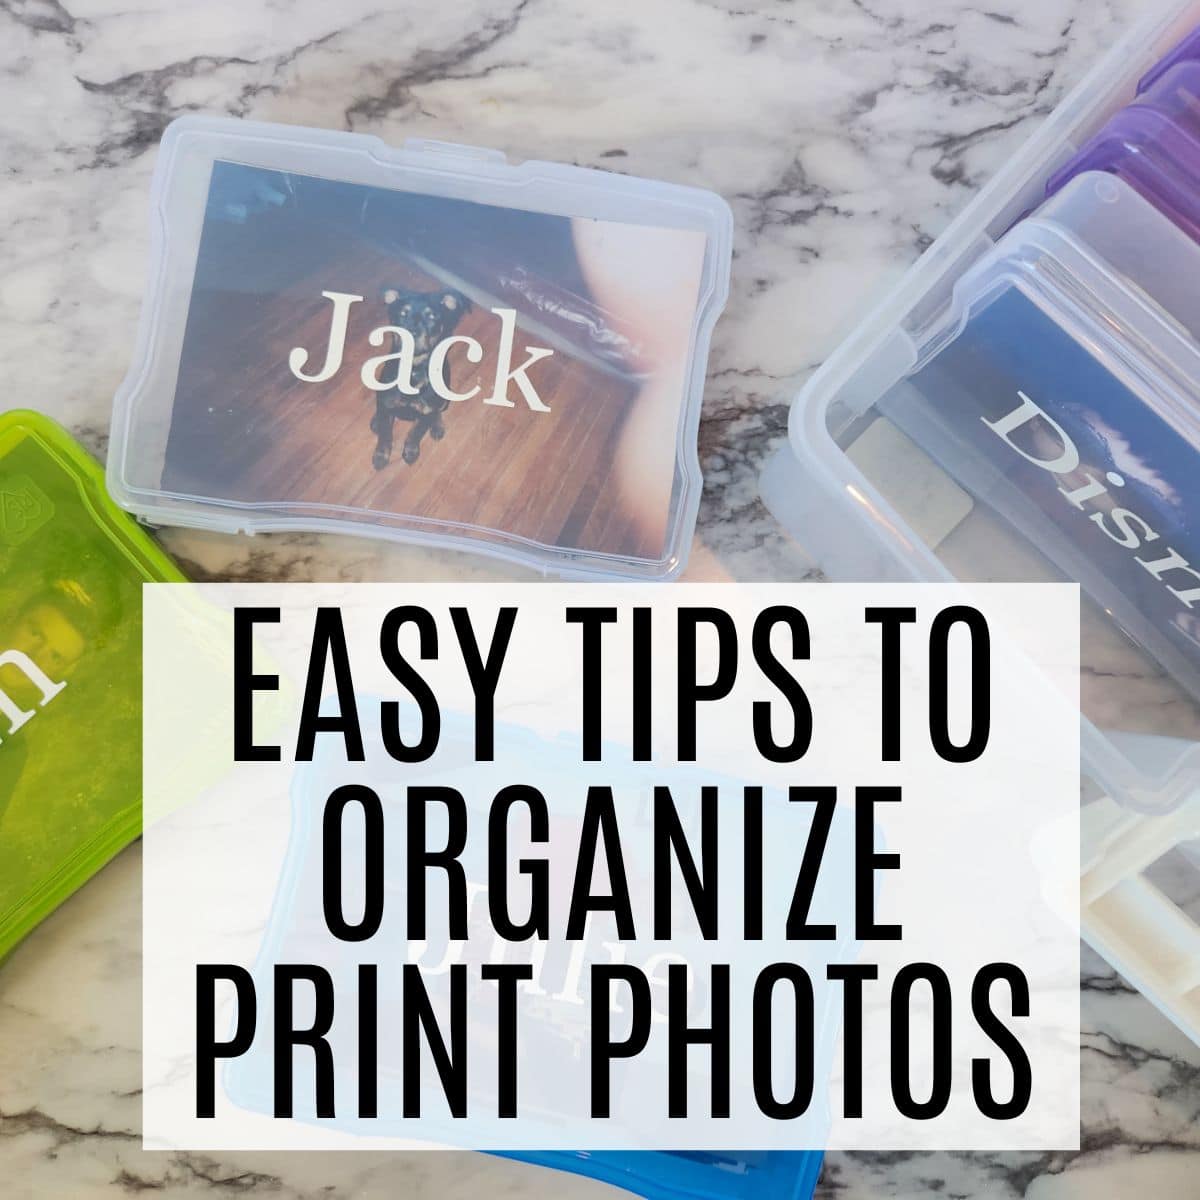 printed photos organized in plastic containers with text overlay.